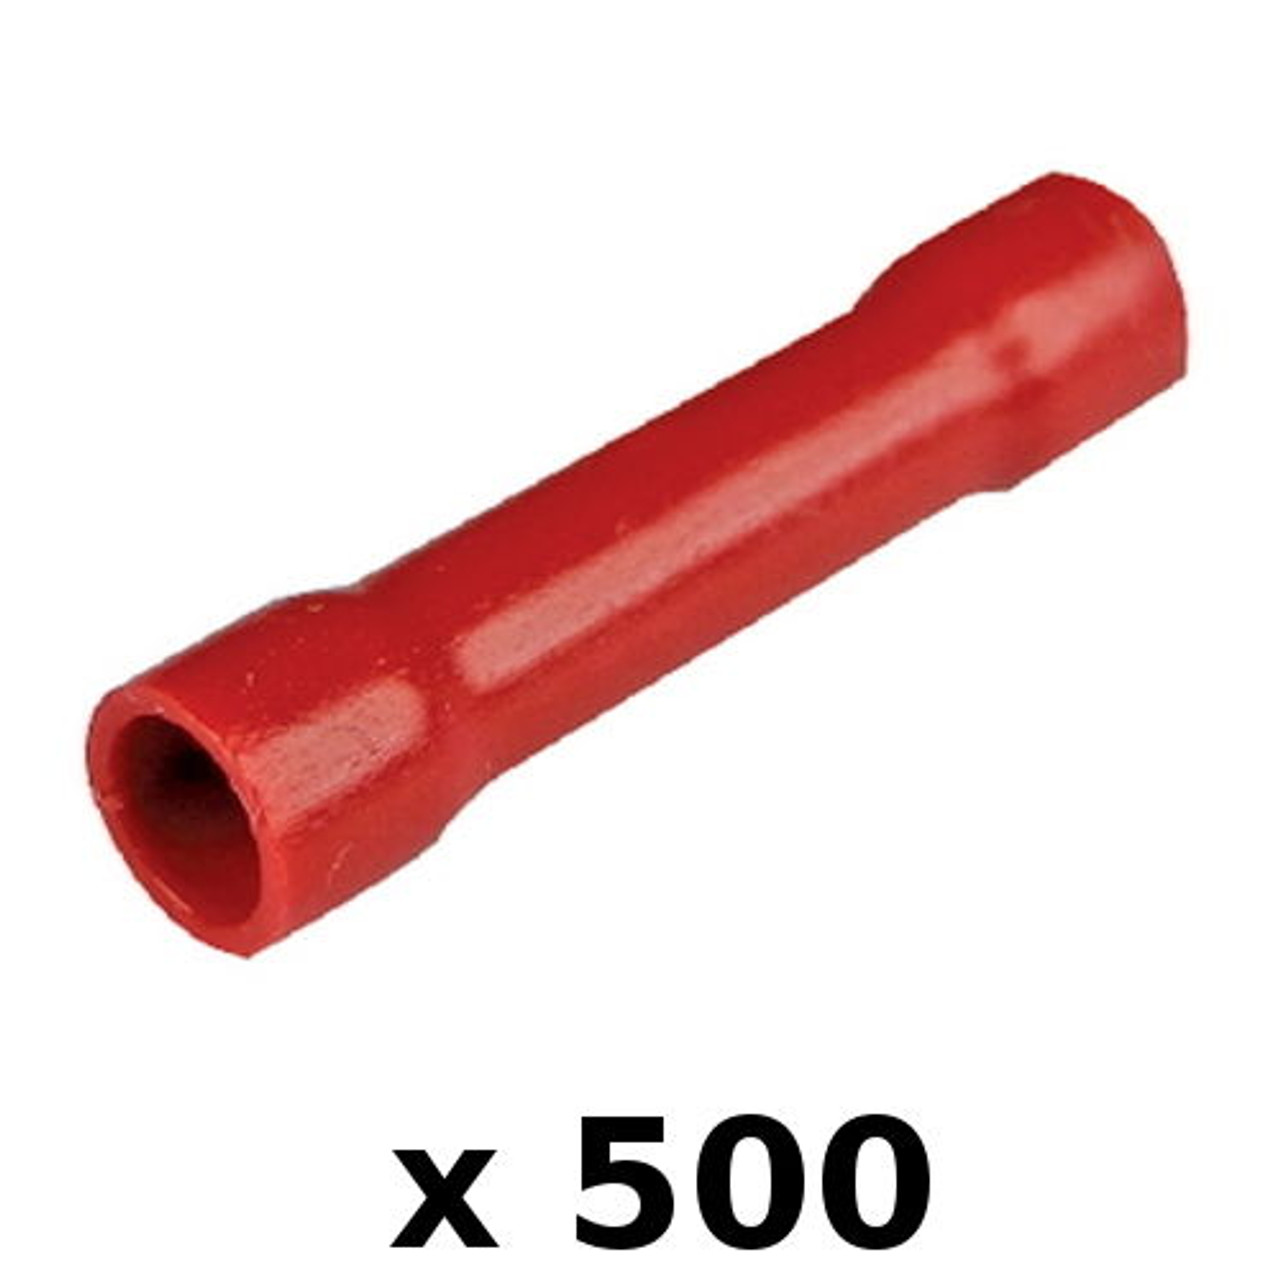 500 Pack Red 22-18 AWG Vinyl Insulated Butt Connector Terminals for Boats